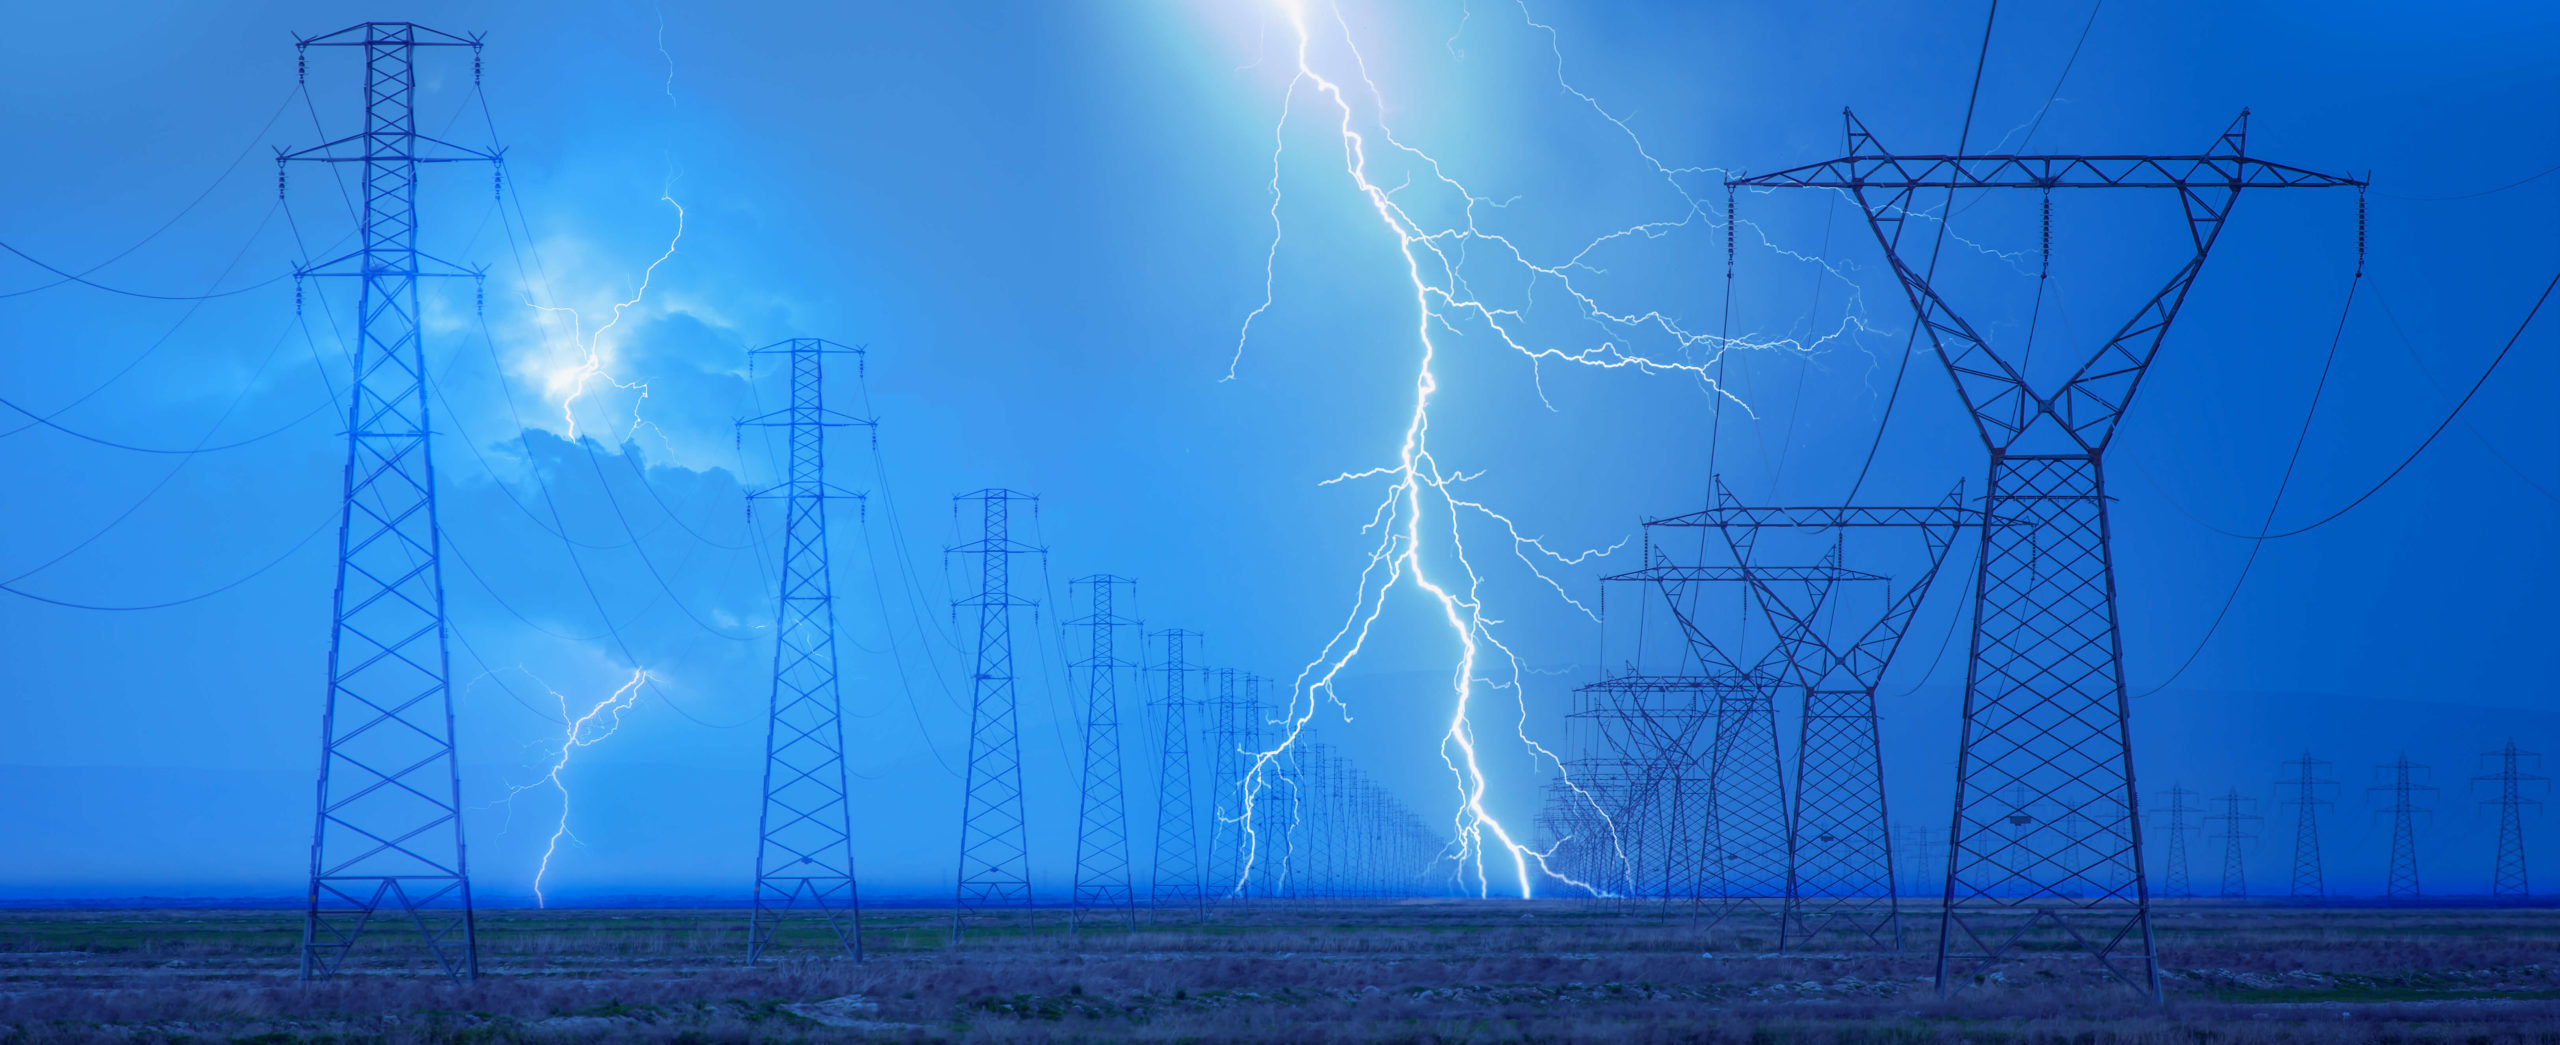 Lightning striking in a field between two rows of power line towers